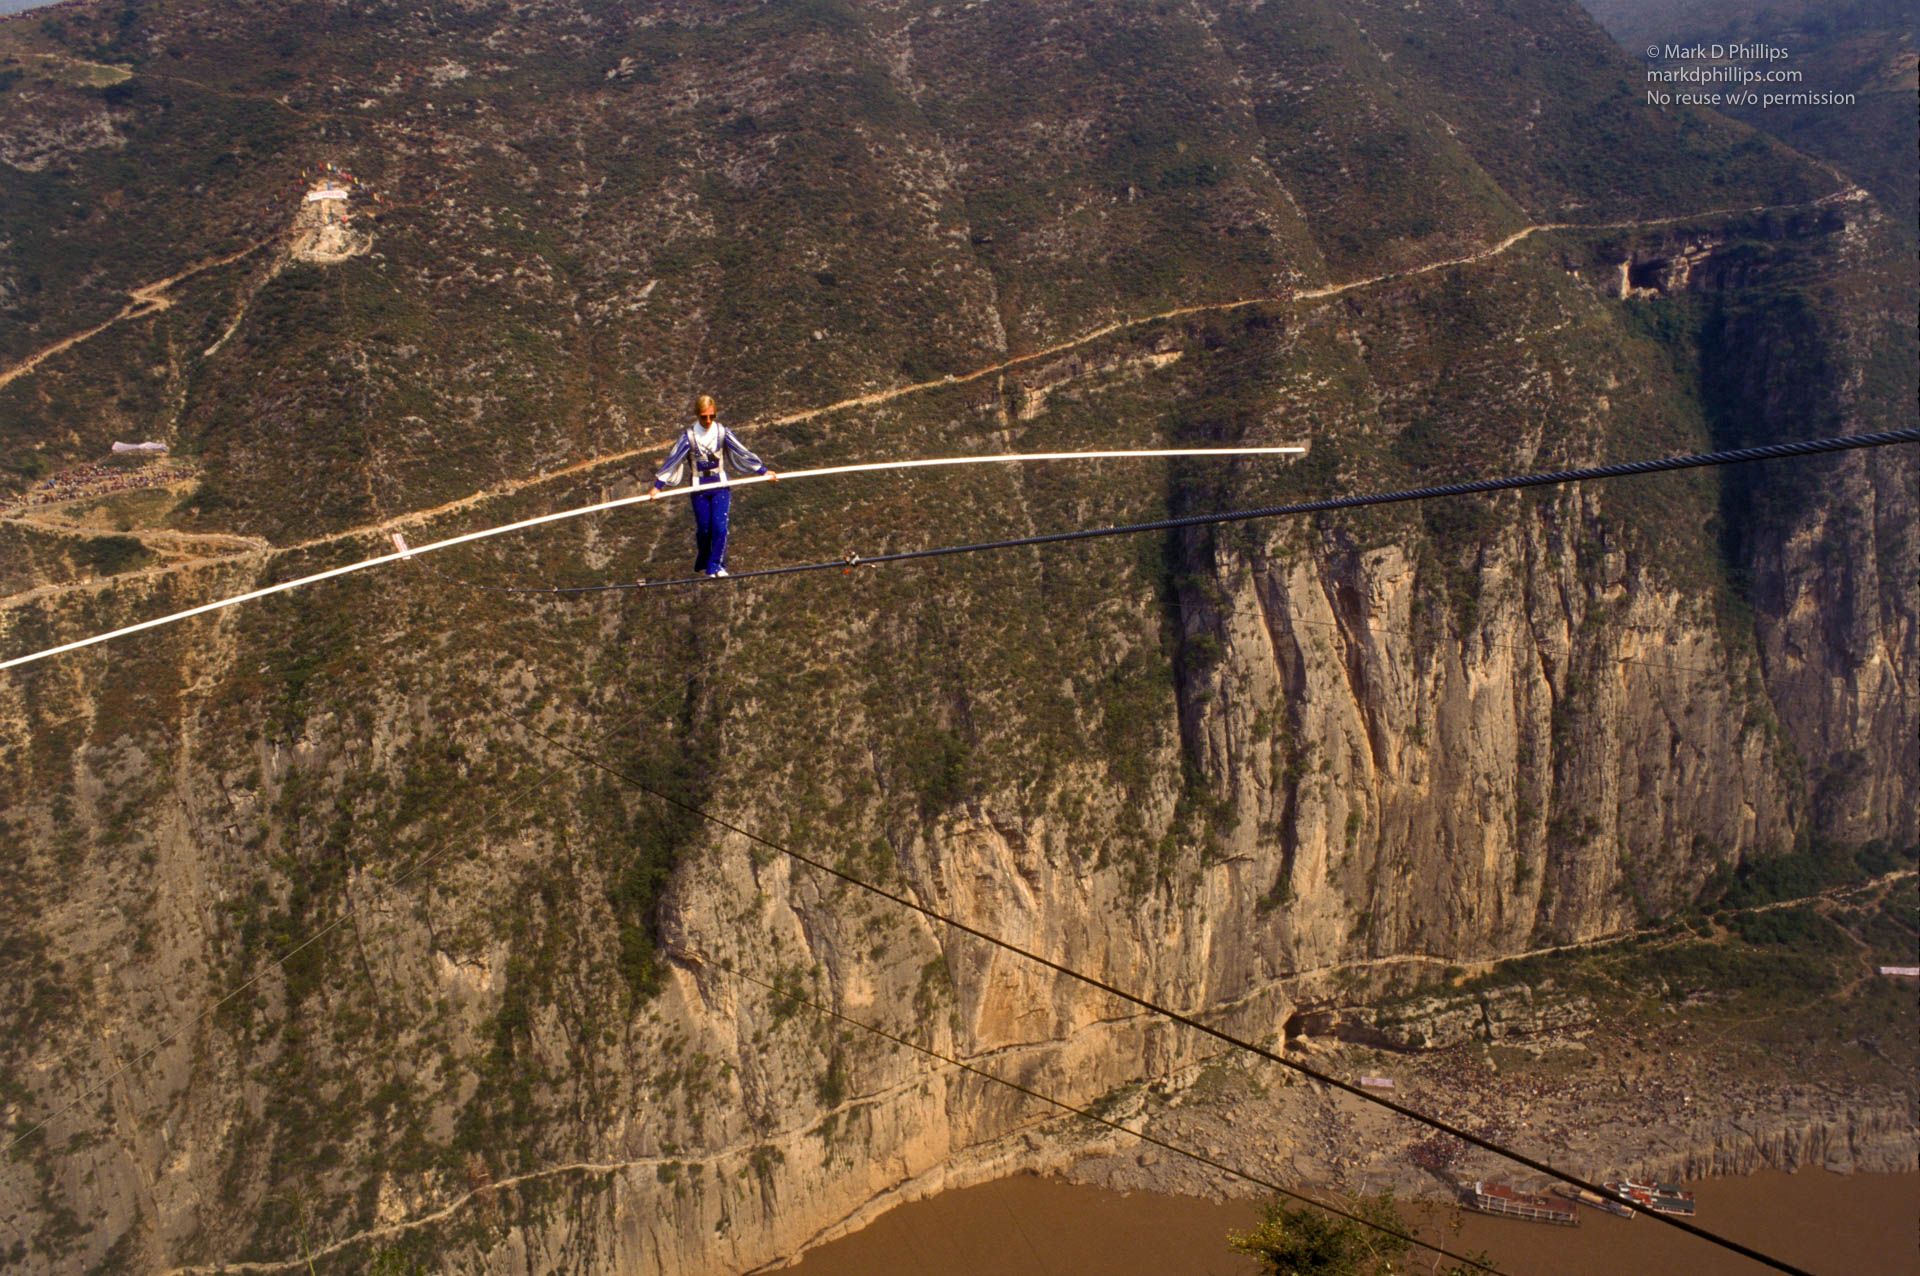 Jay Cochrane, "The Prince of the Air", walks on a cable over the Yangtze River in Qutang Gorge, China, on October 28, 1995, during The Great China Skywalk . The skywalk was and is the greatest highwire walk ever made spanning half a mile between the canyon walls and 1,350 feet above the river. Thousands of spectators lined the trails within the legendary Three Gorges of the Yangtze. The gorges are now filled with water with the completion of the Three Gorges Dam, creating a 500-foot deep reservoir in Qutang Gorge. Photo by MARK D PHILLIPS